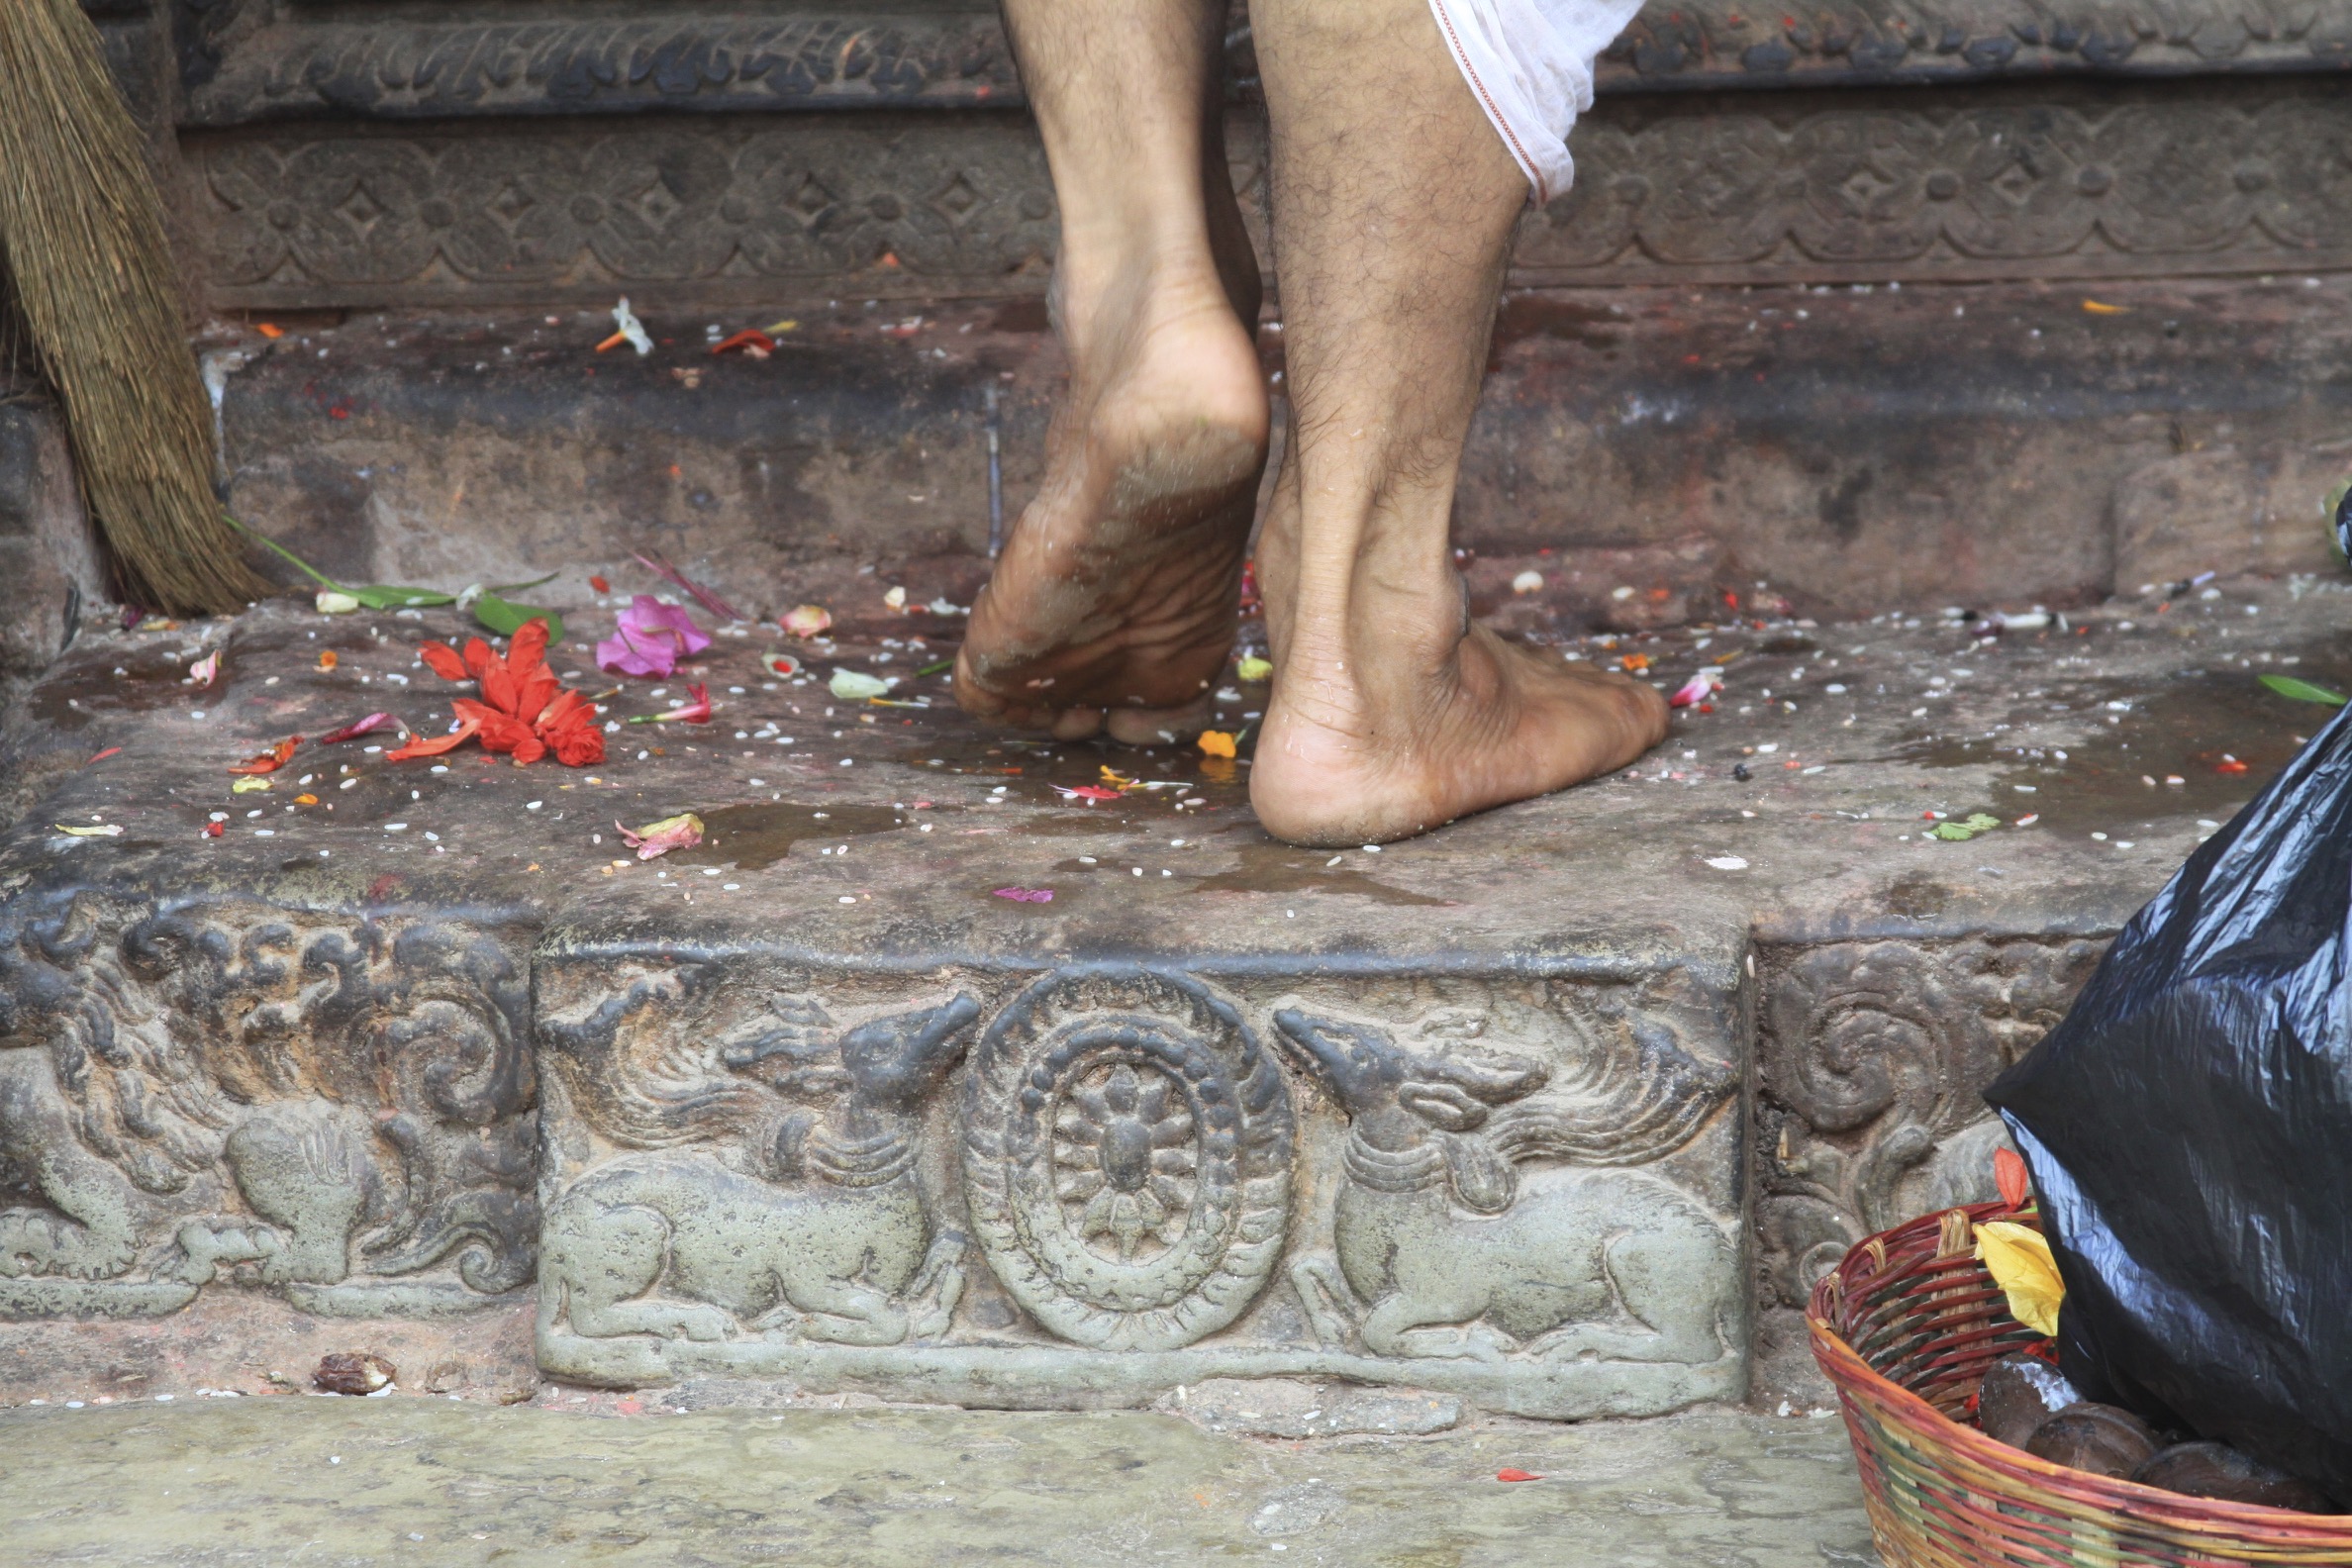 A hindu priest walking into the Temple